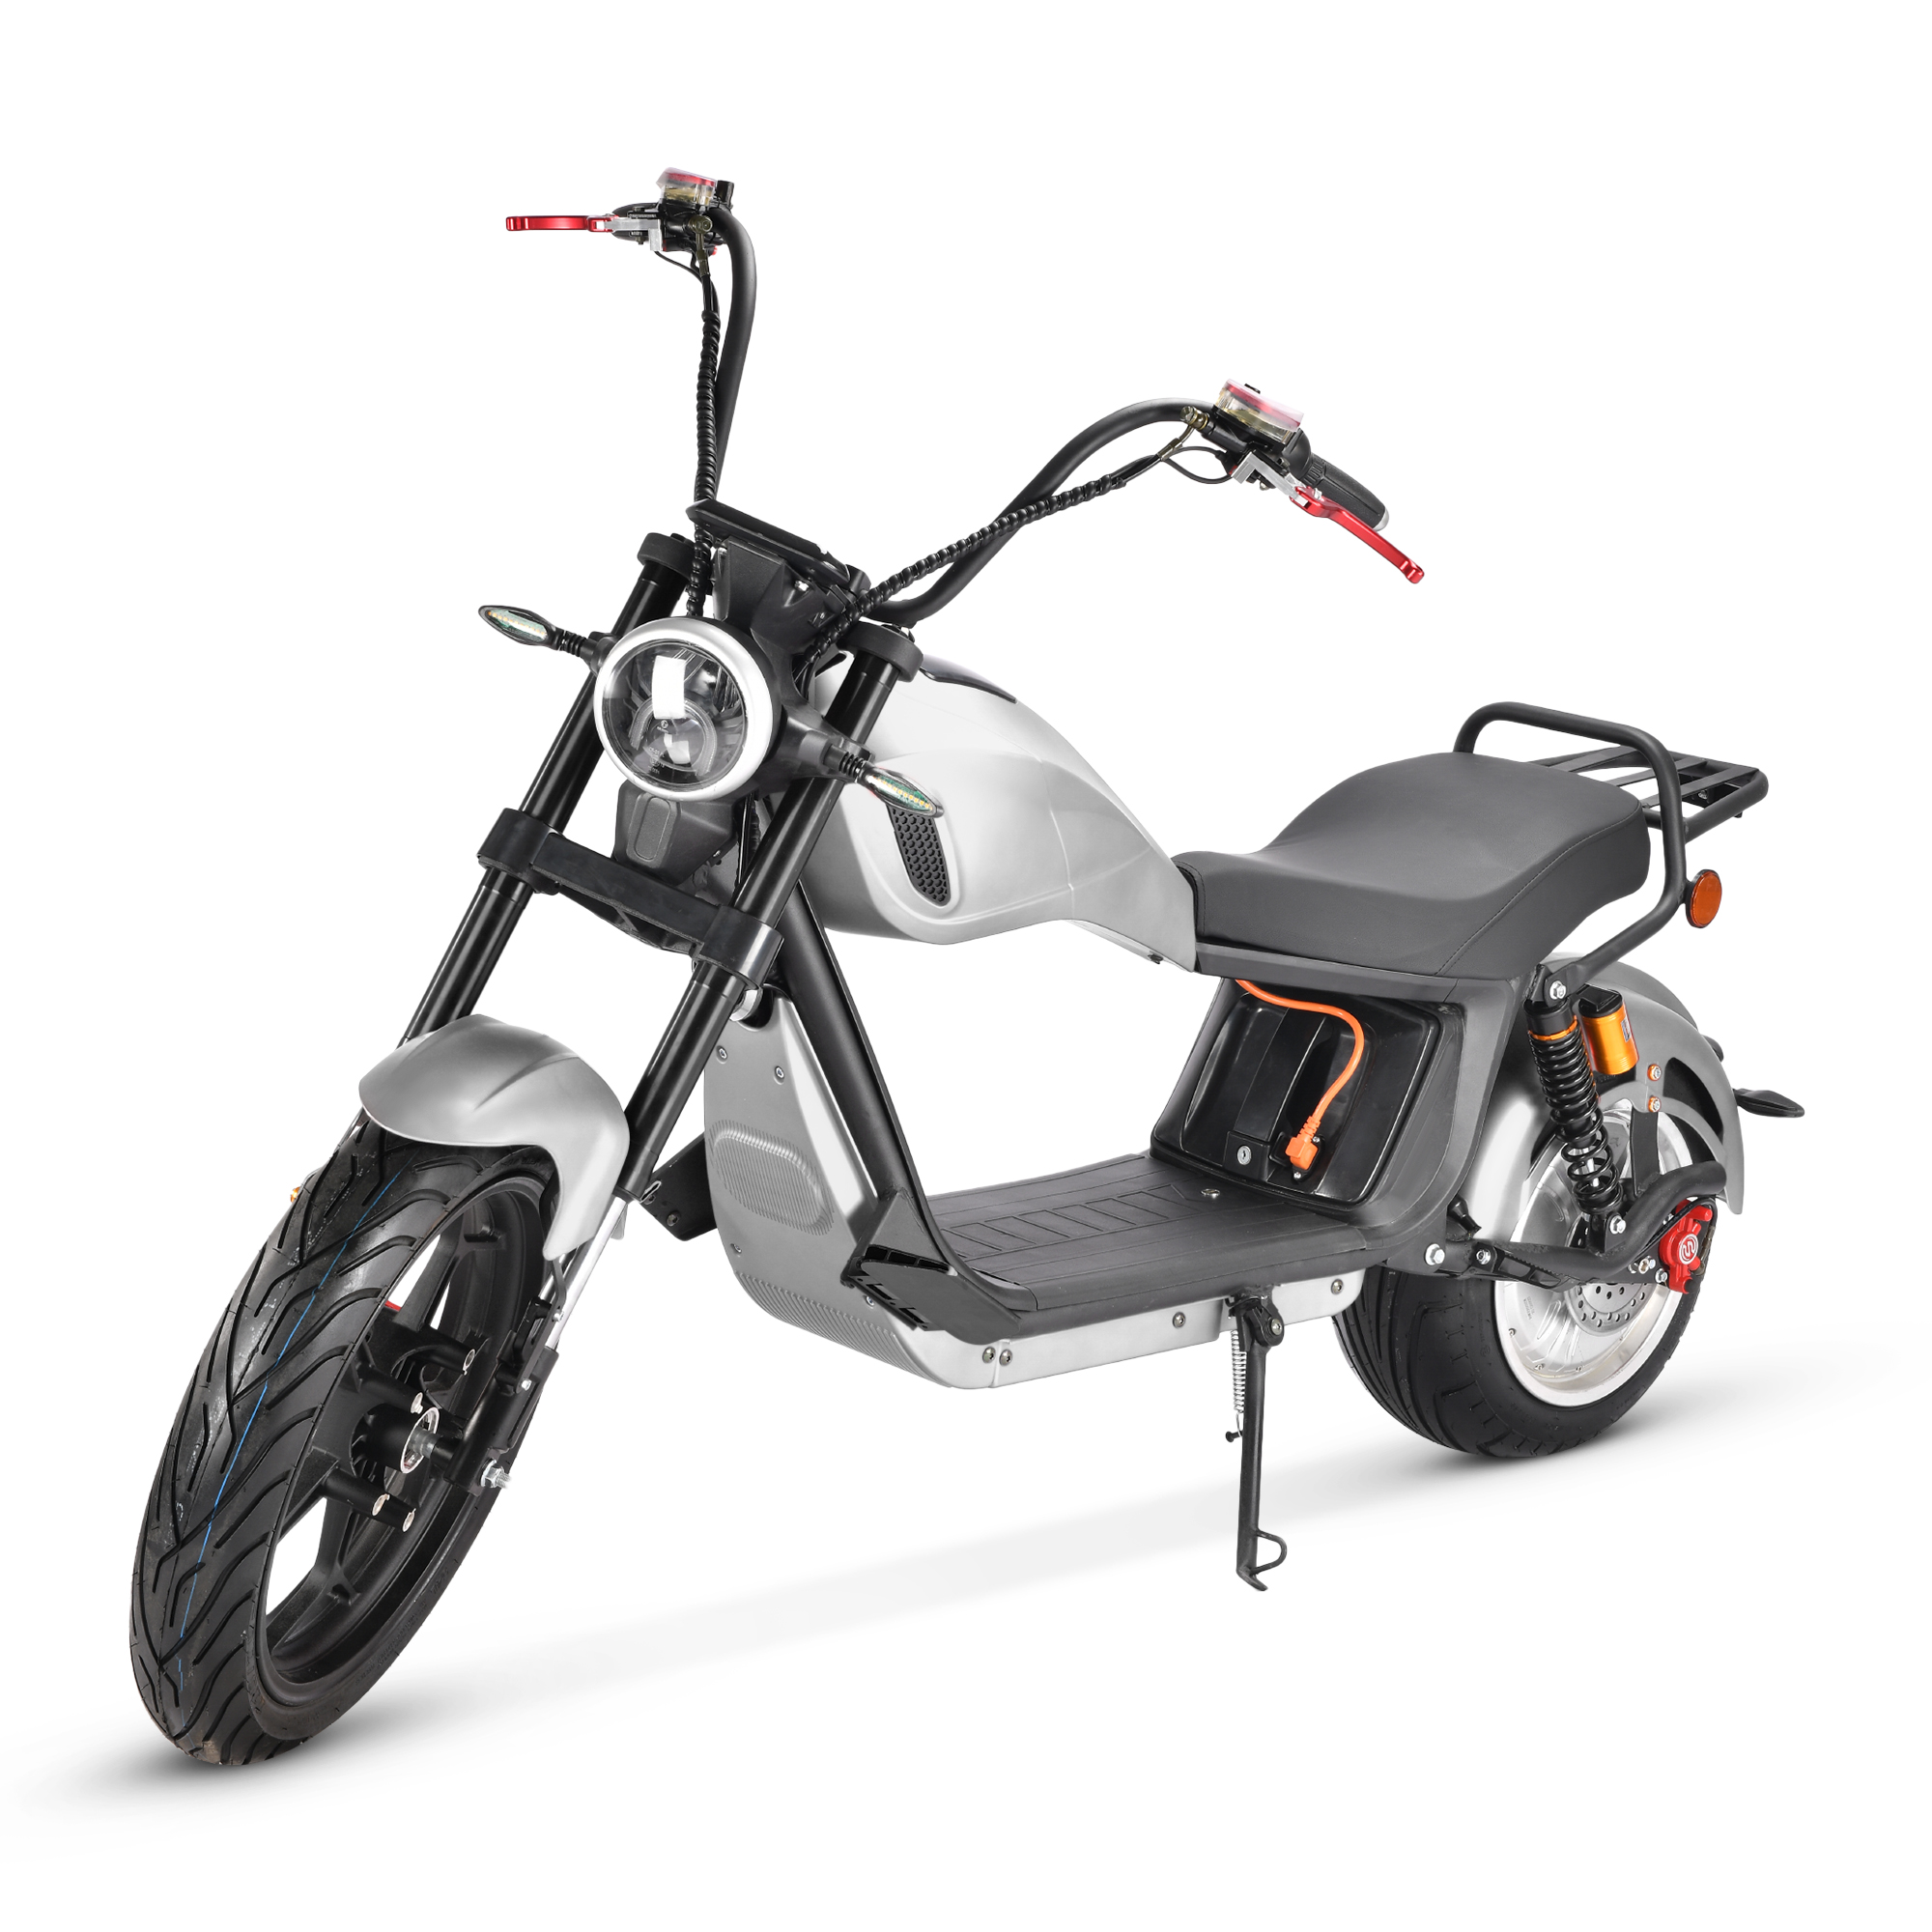 GaeaCycle CP-6 Citycoco Electric Chopper Motorcycle Scooter 2000W 45km/h COC Street Legal for Adults